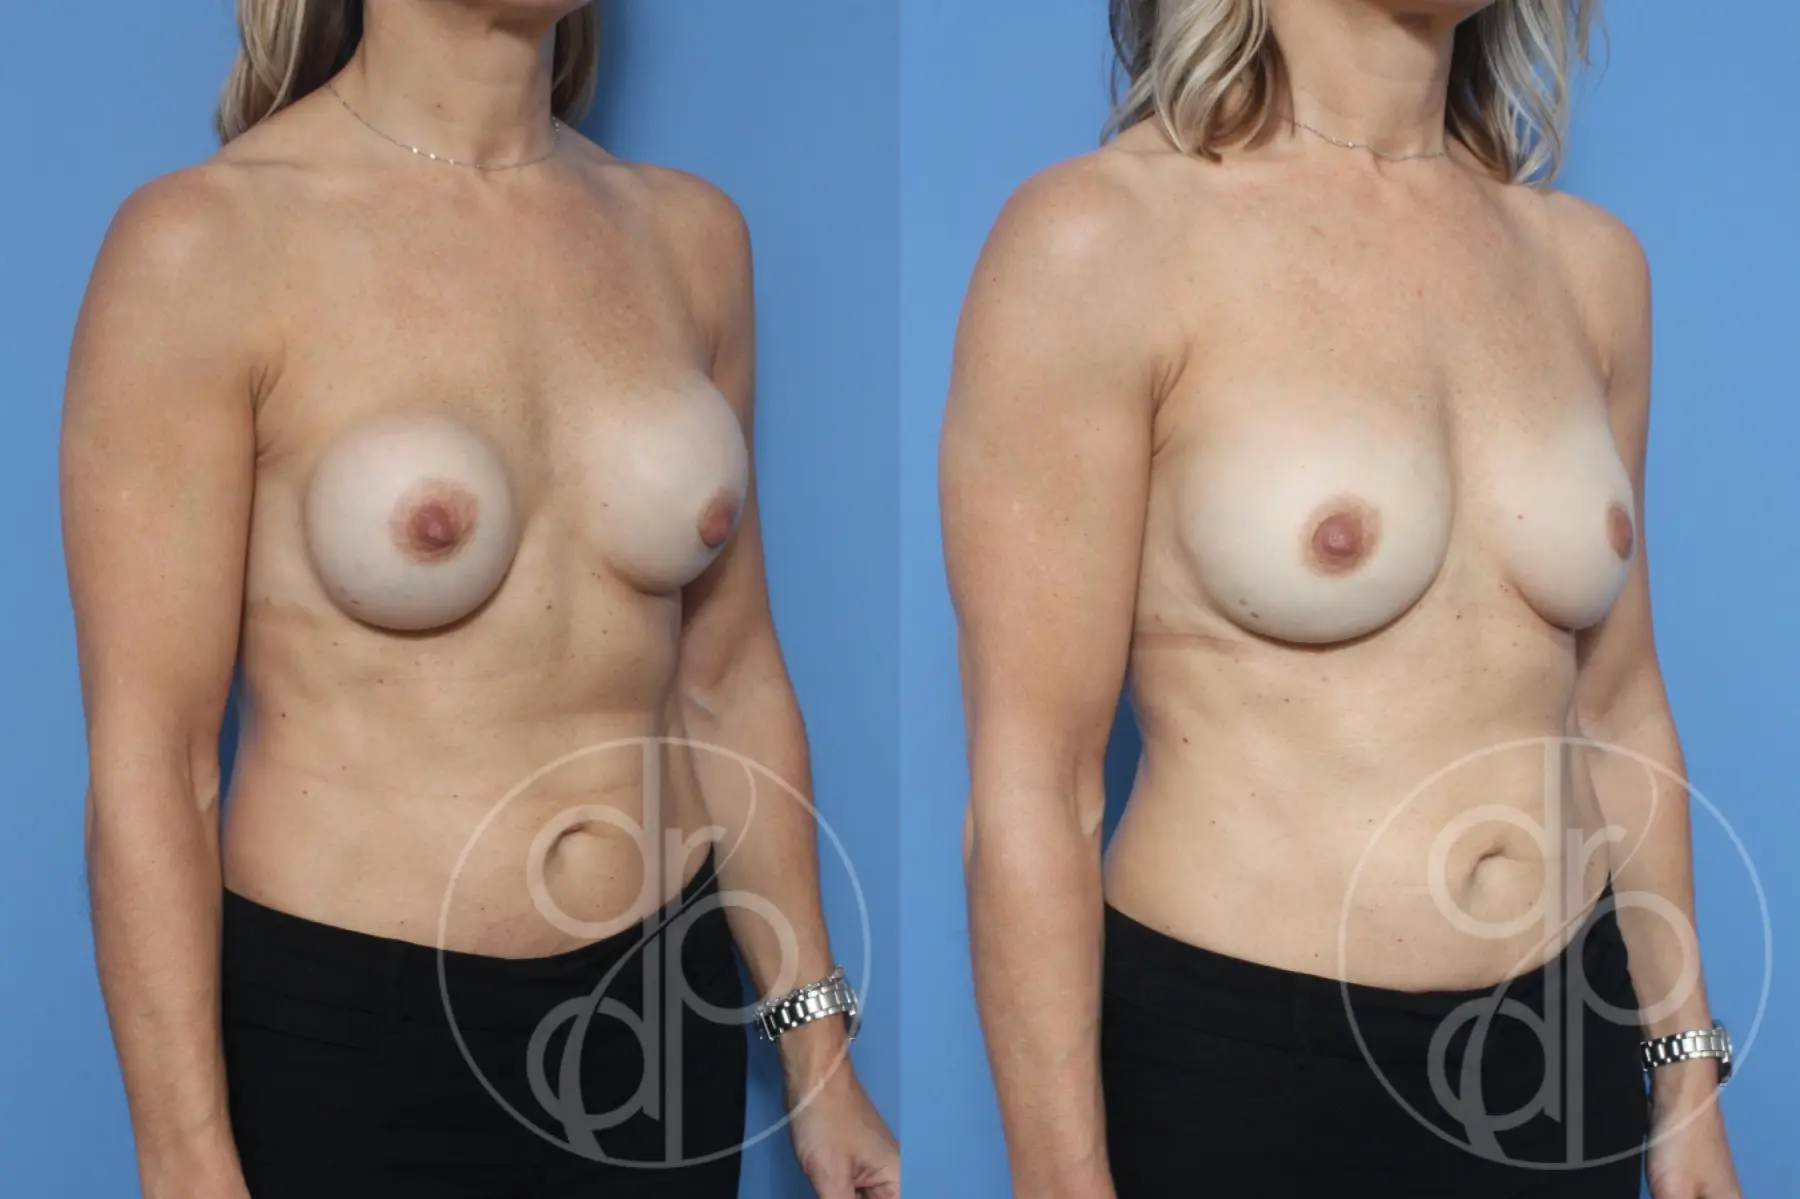 patient 10500 remove and replace breast implants before and after result - Before and After 2